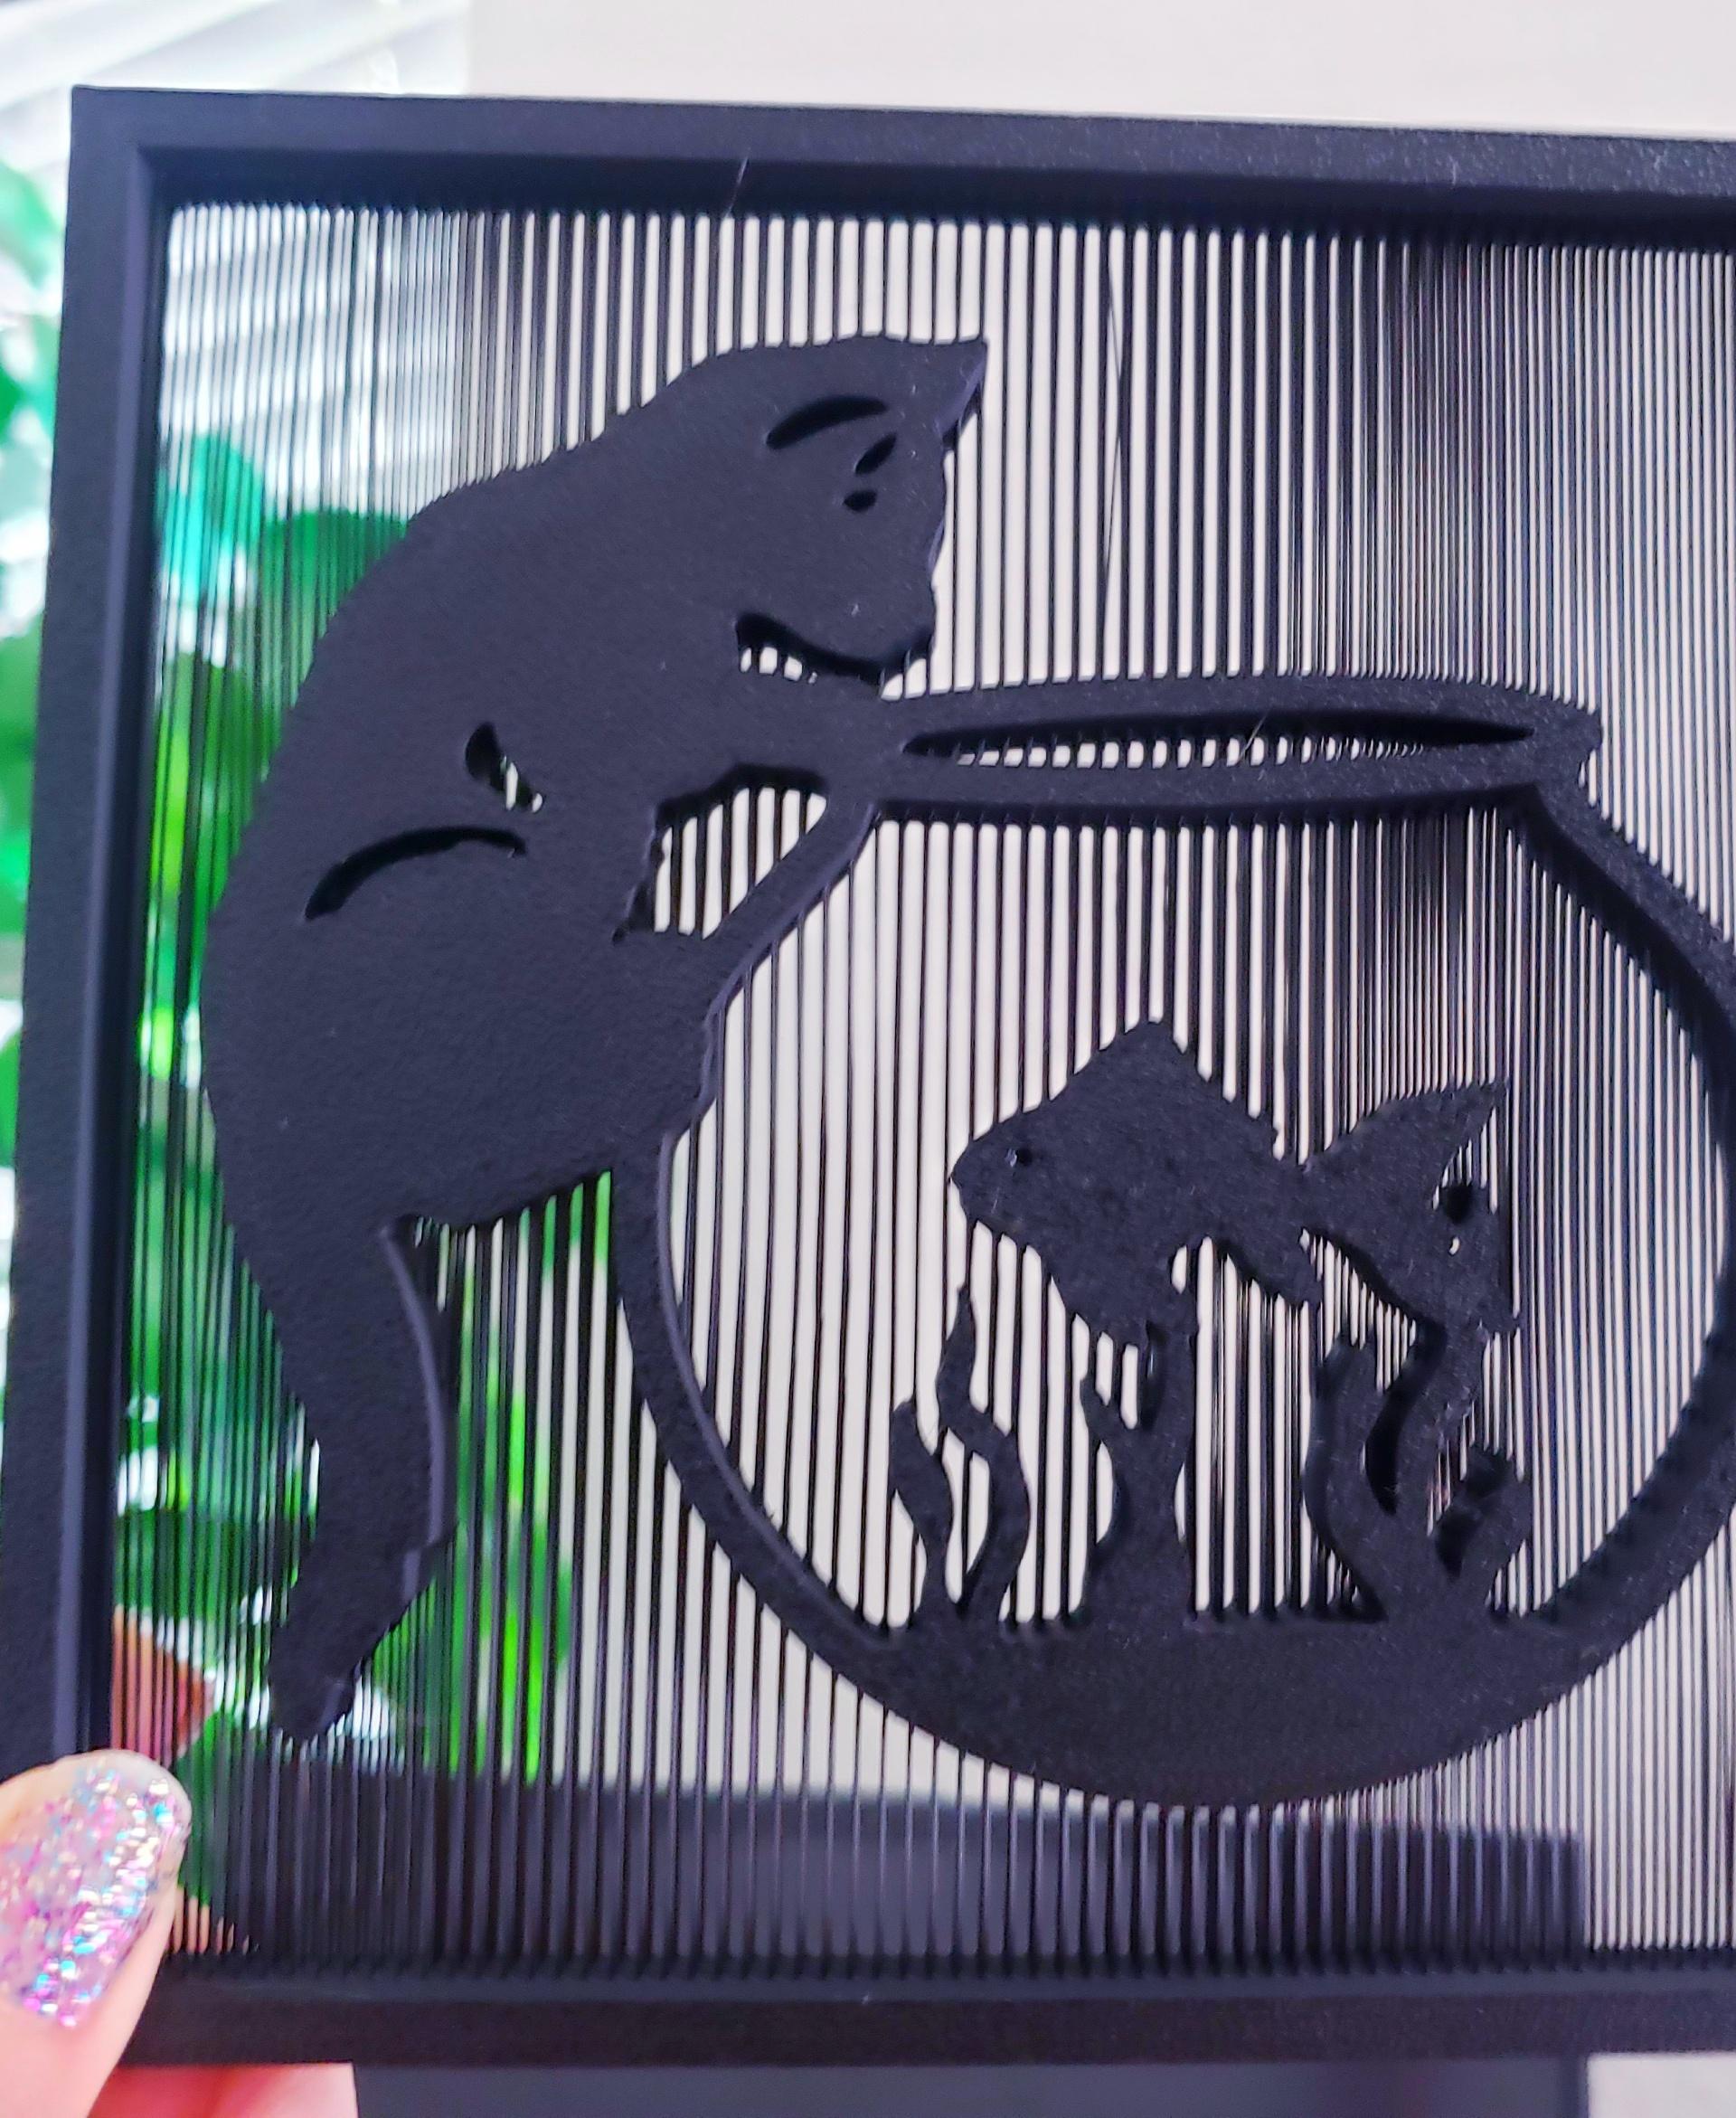 EASY Print in Place Kitty string art 3d floating kitten in a fishbowl free standing art piece - My lil kitty in solid black - 3d model